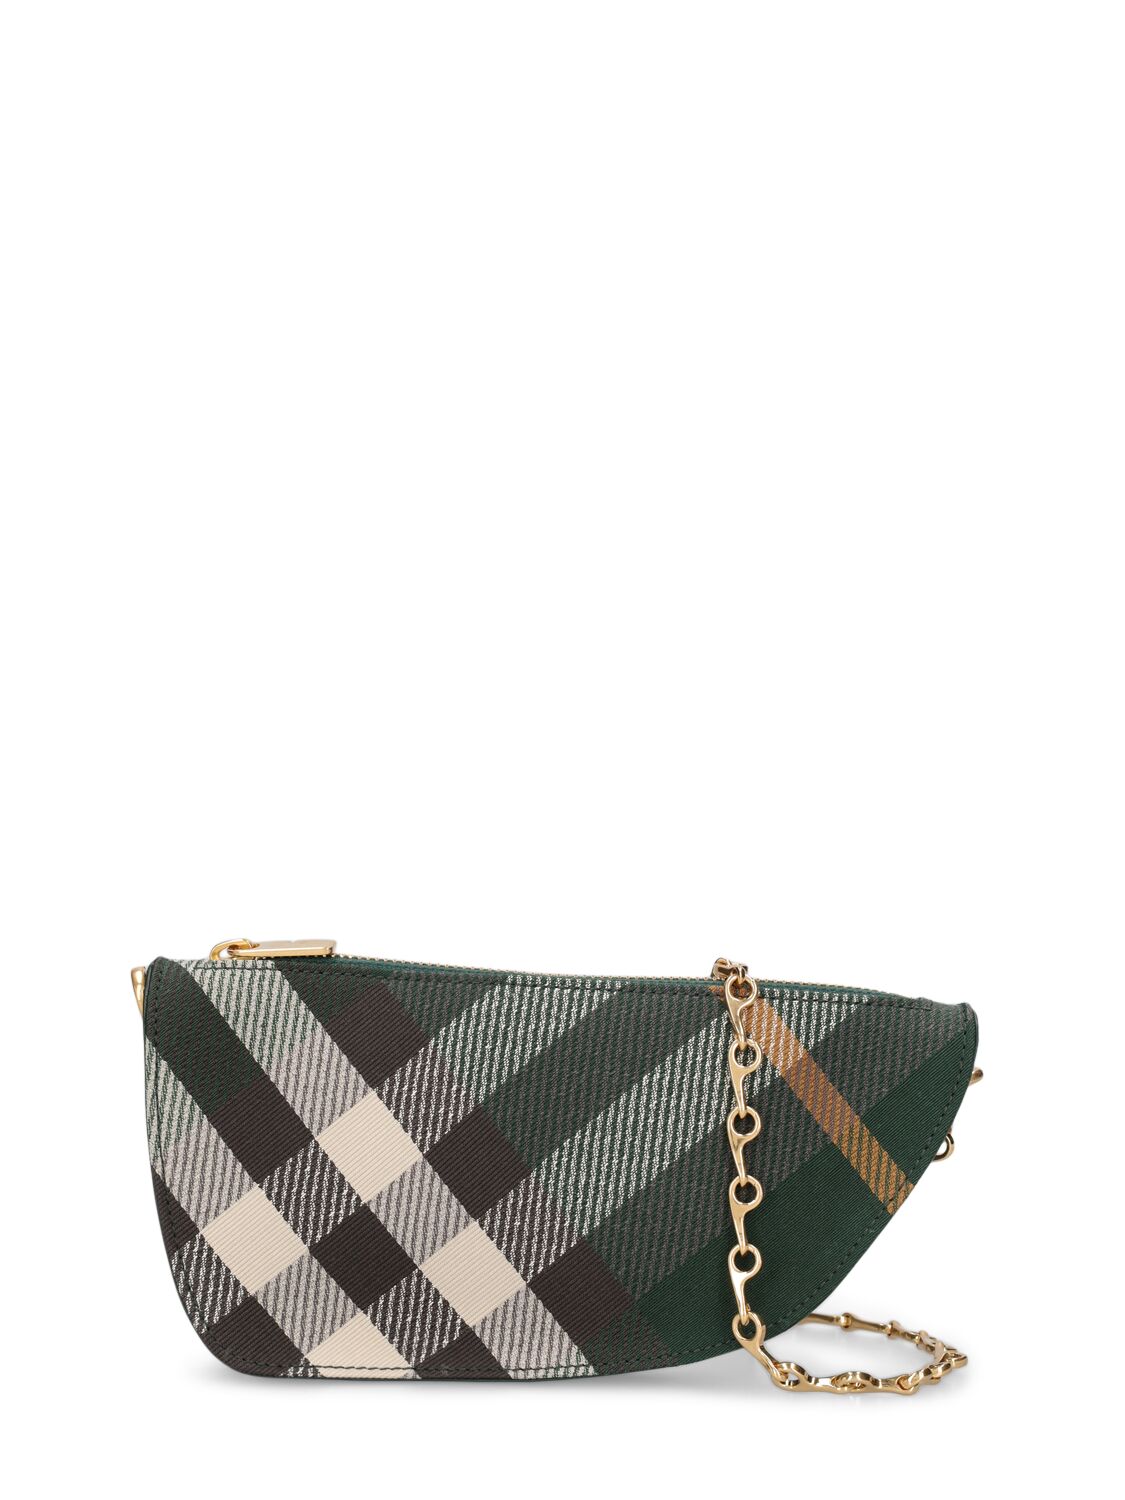 Burberry Ls Micro Shield Shoulder Bag In Ivy Green